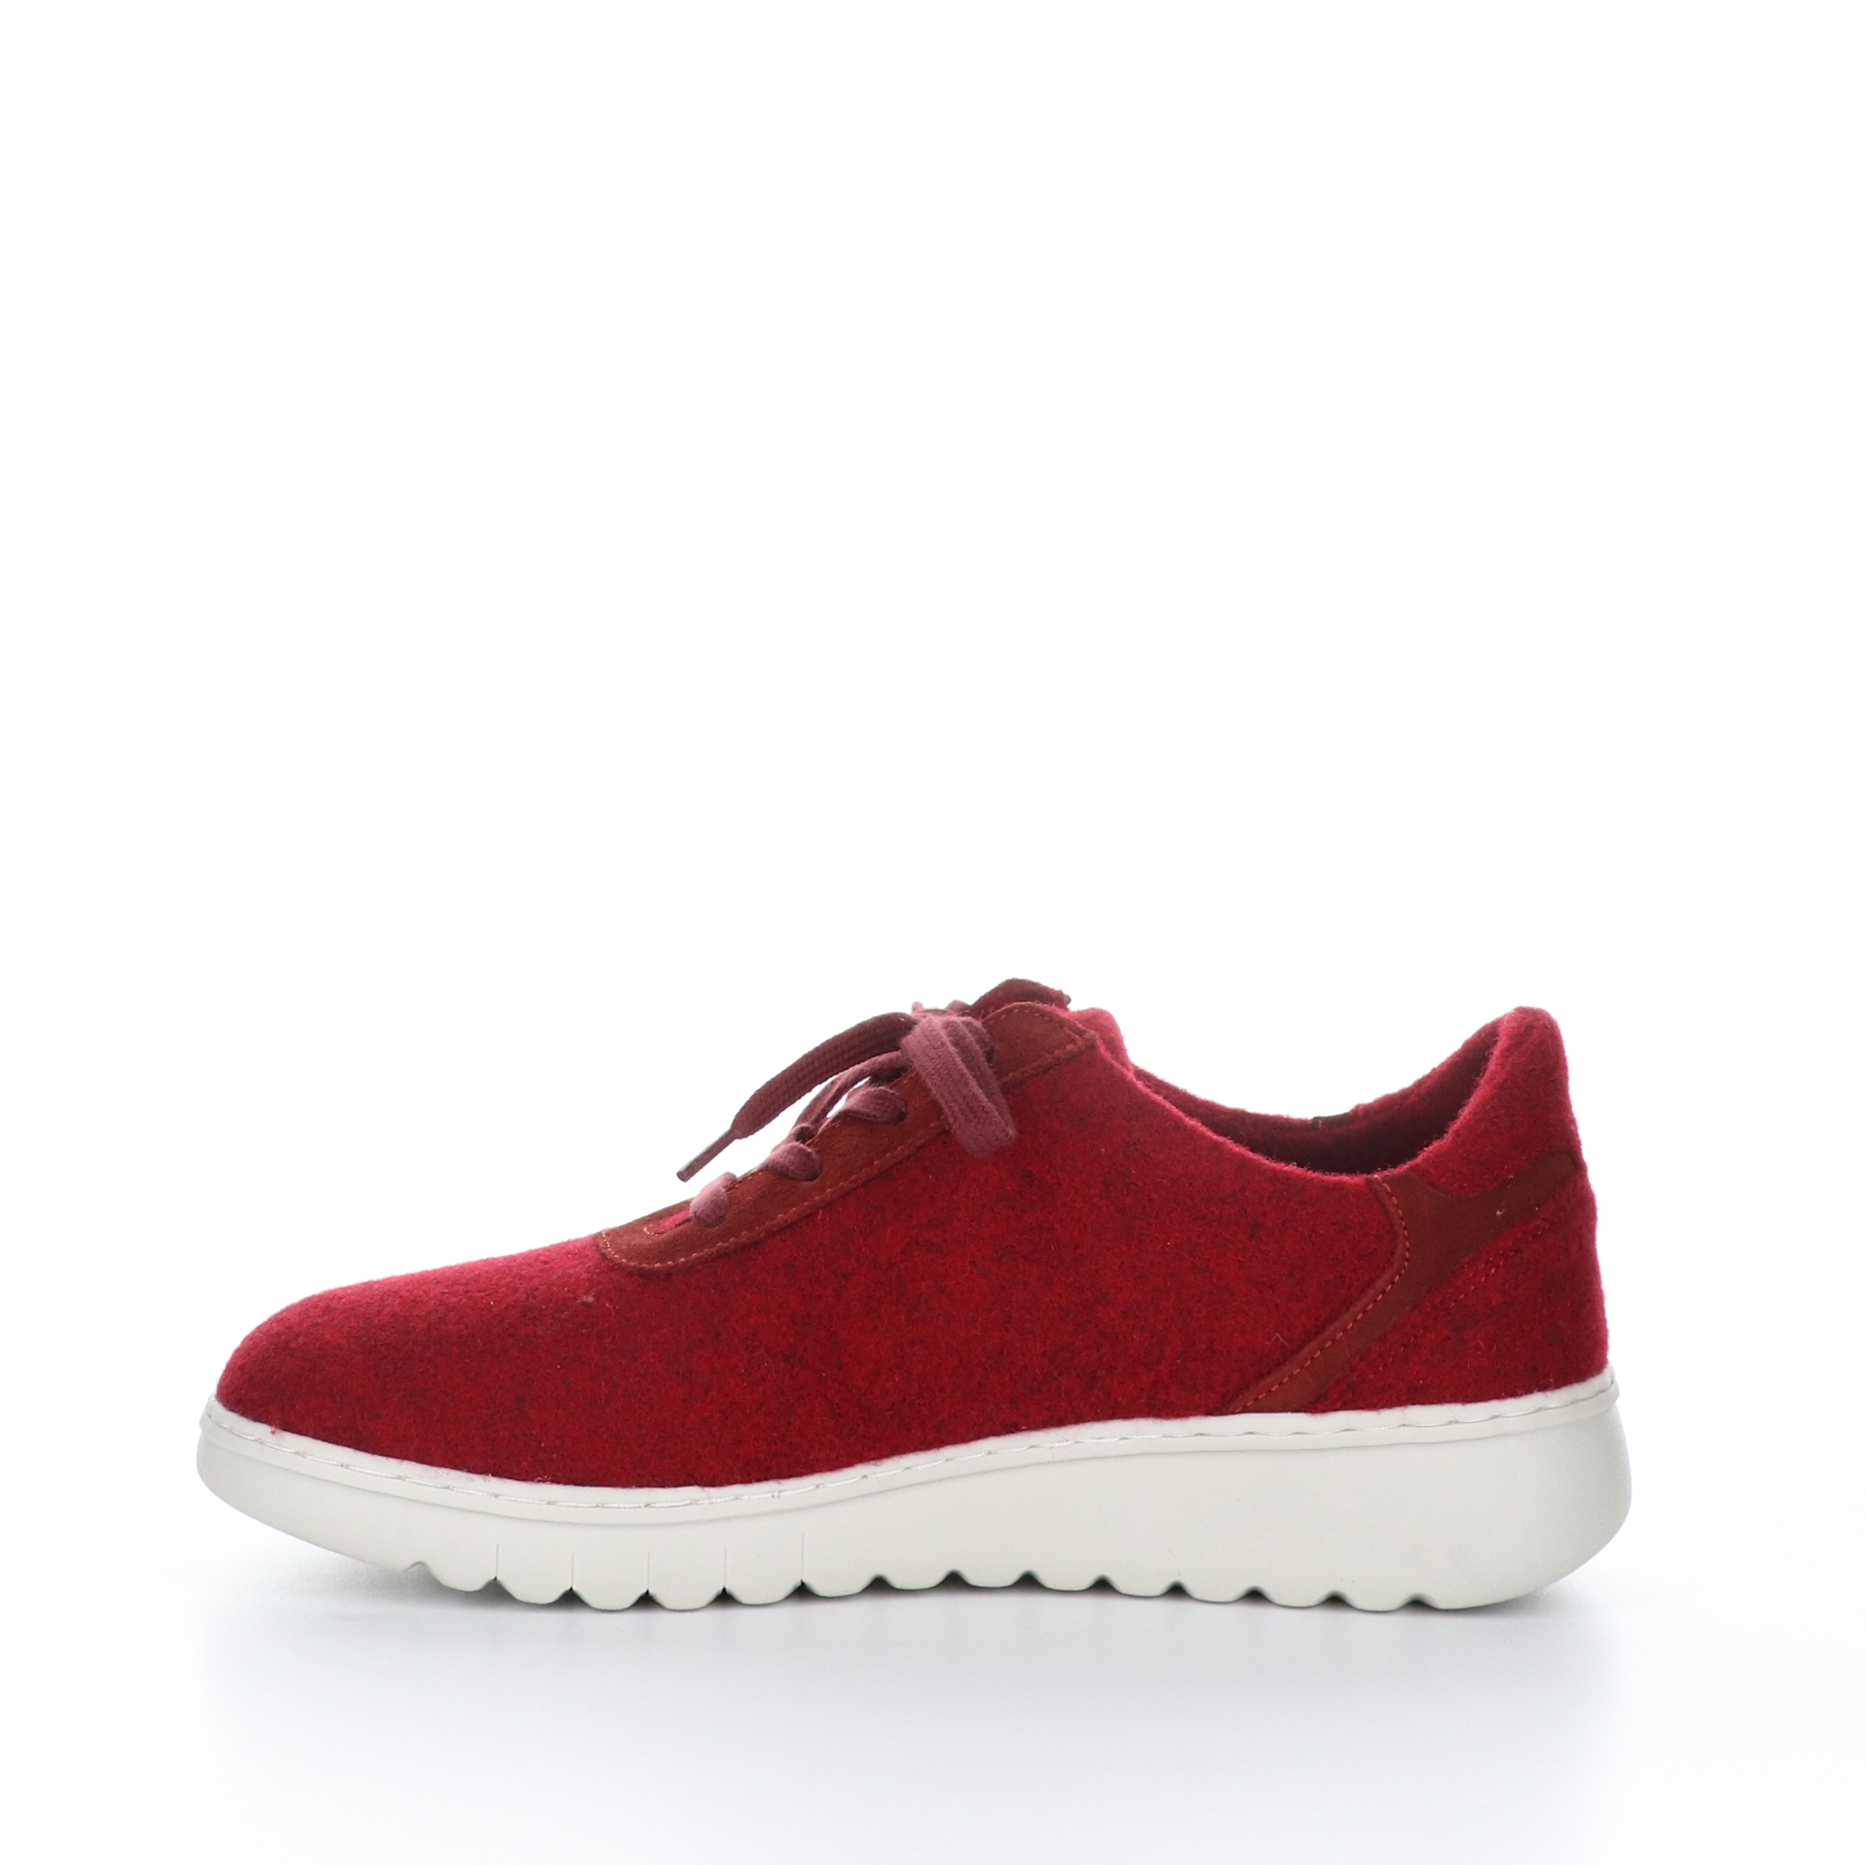 Inner side view of the softinos elra sneaker in red. These tweed sneakers have a lace up front and a white sole.